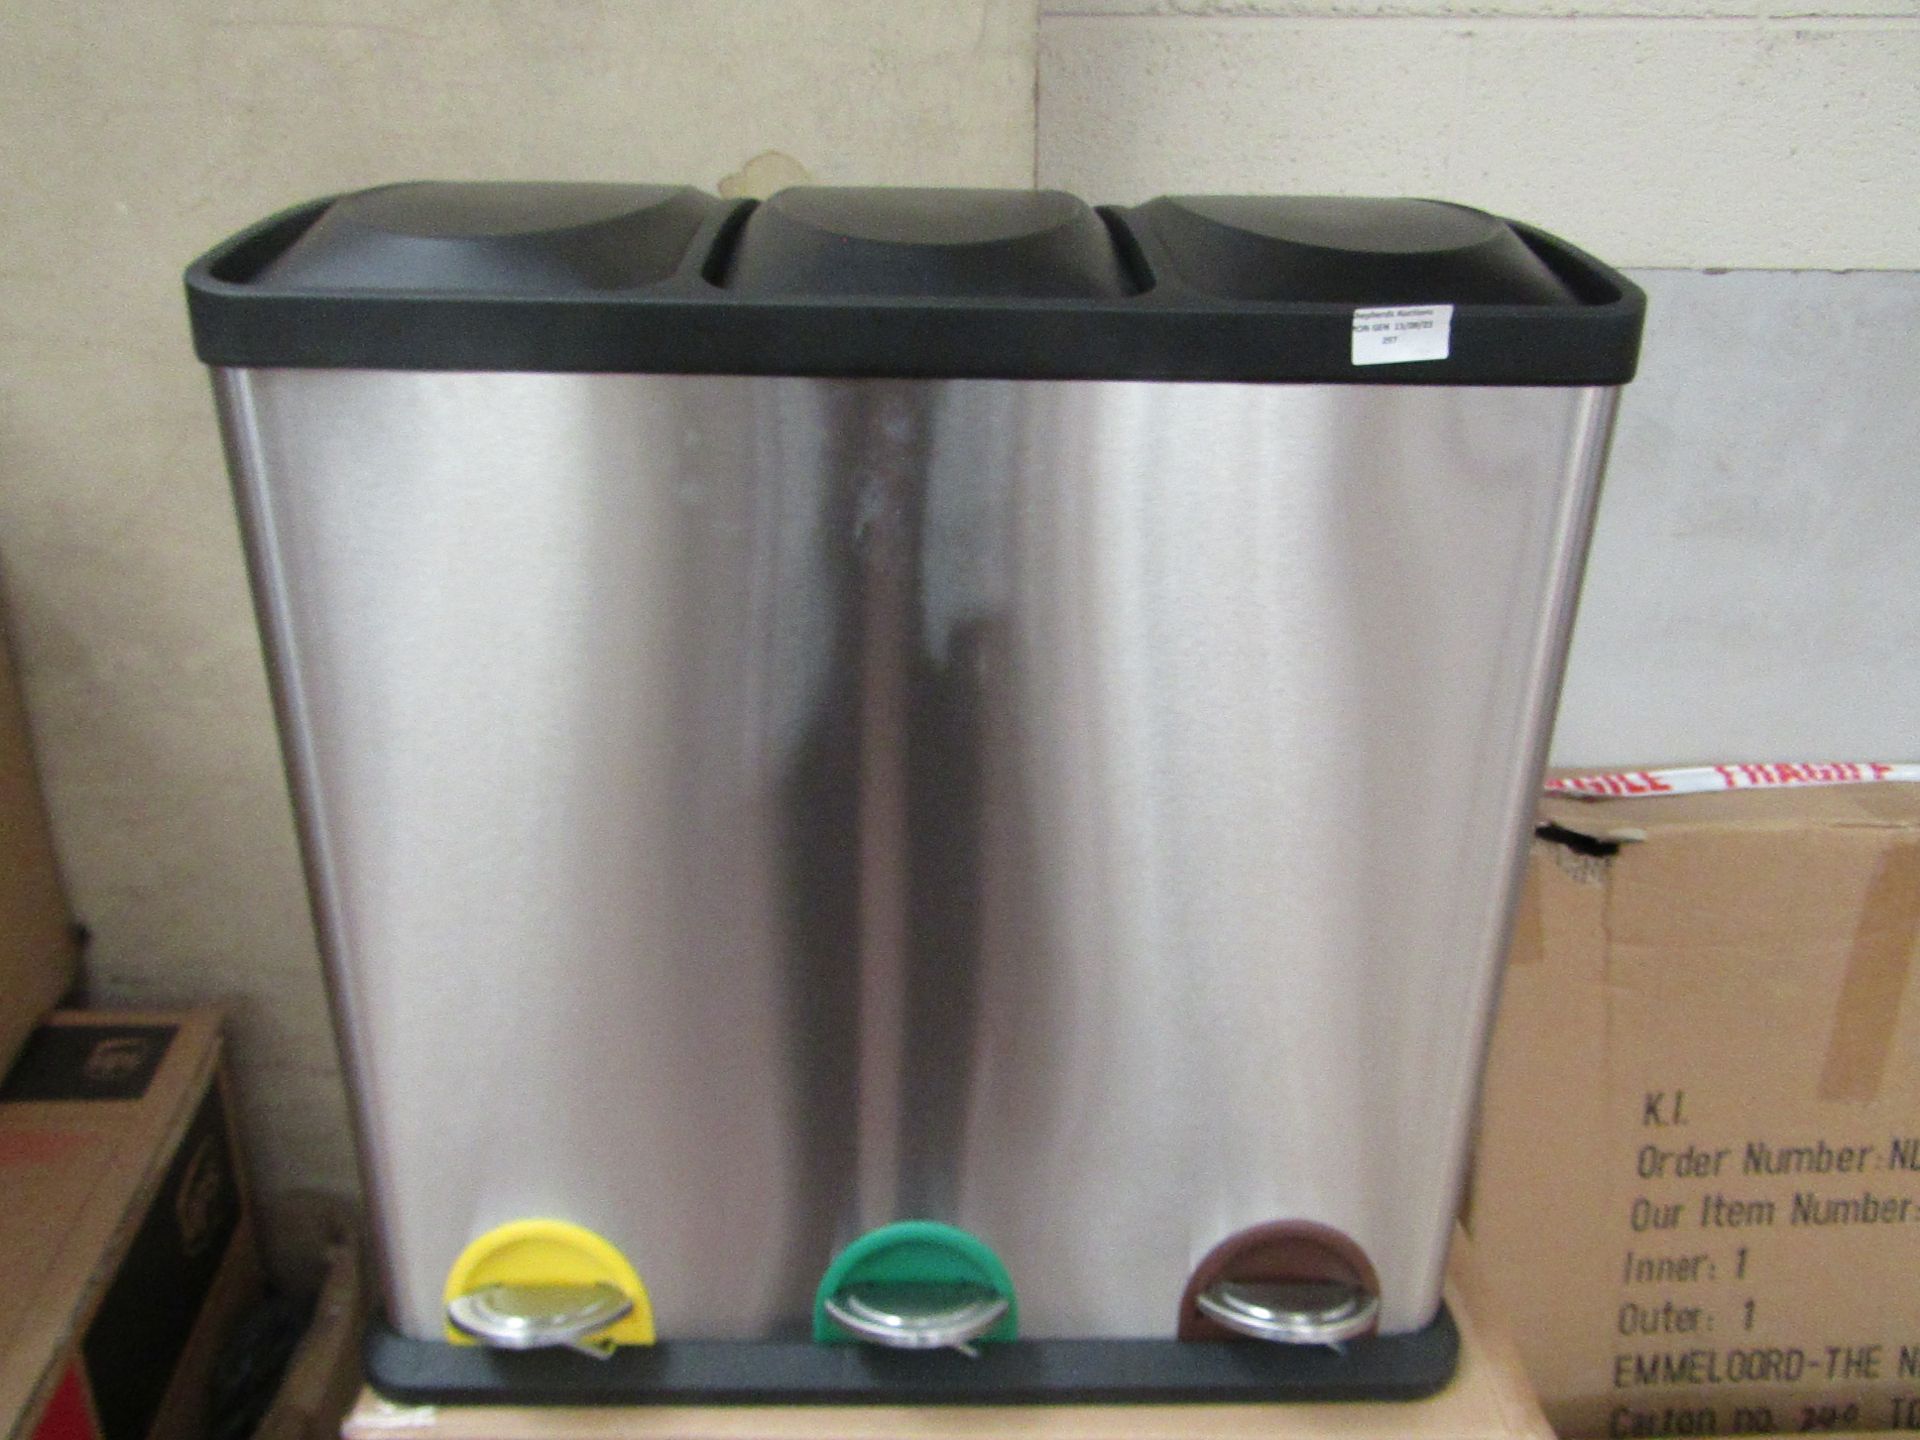 Urban Living - Stainless Steel 3 Compartment Recycling Pedal Bin - No Visible Damage & Boxed.